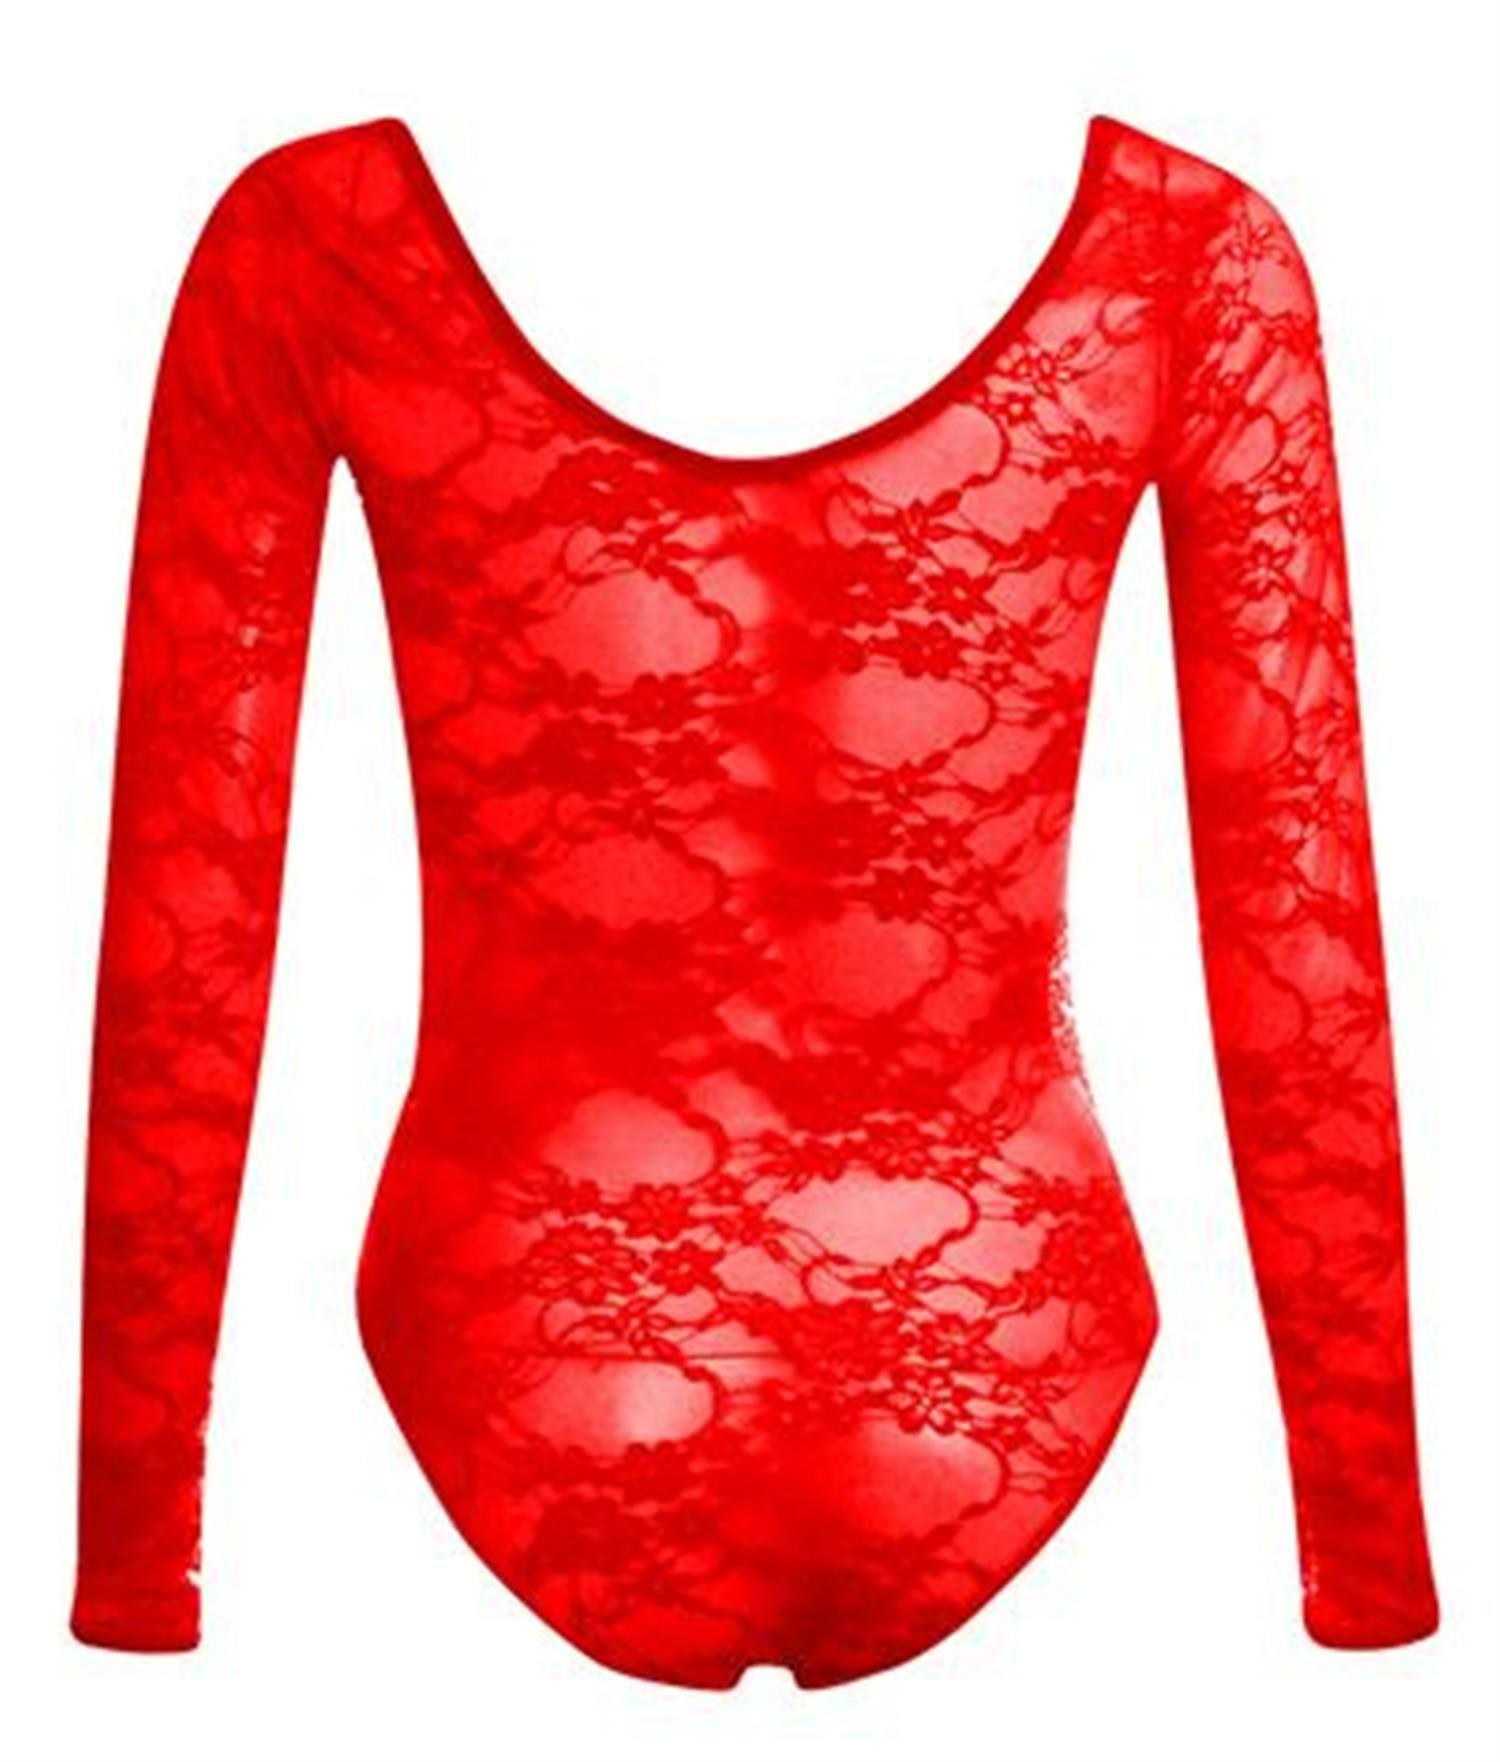 Nel Floral Lace Full Sleeve Leotard Bodysuits Top 8-14 - Spring Special